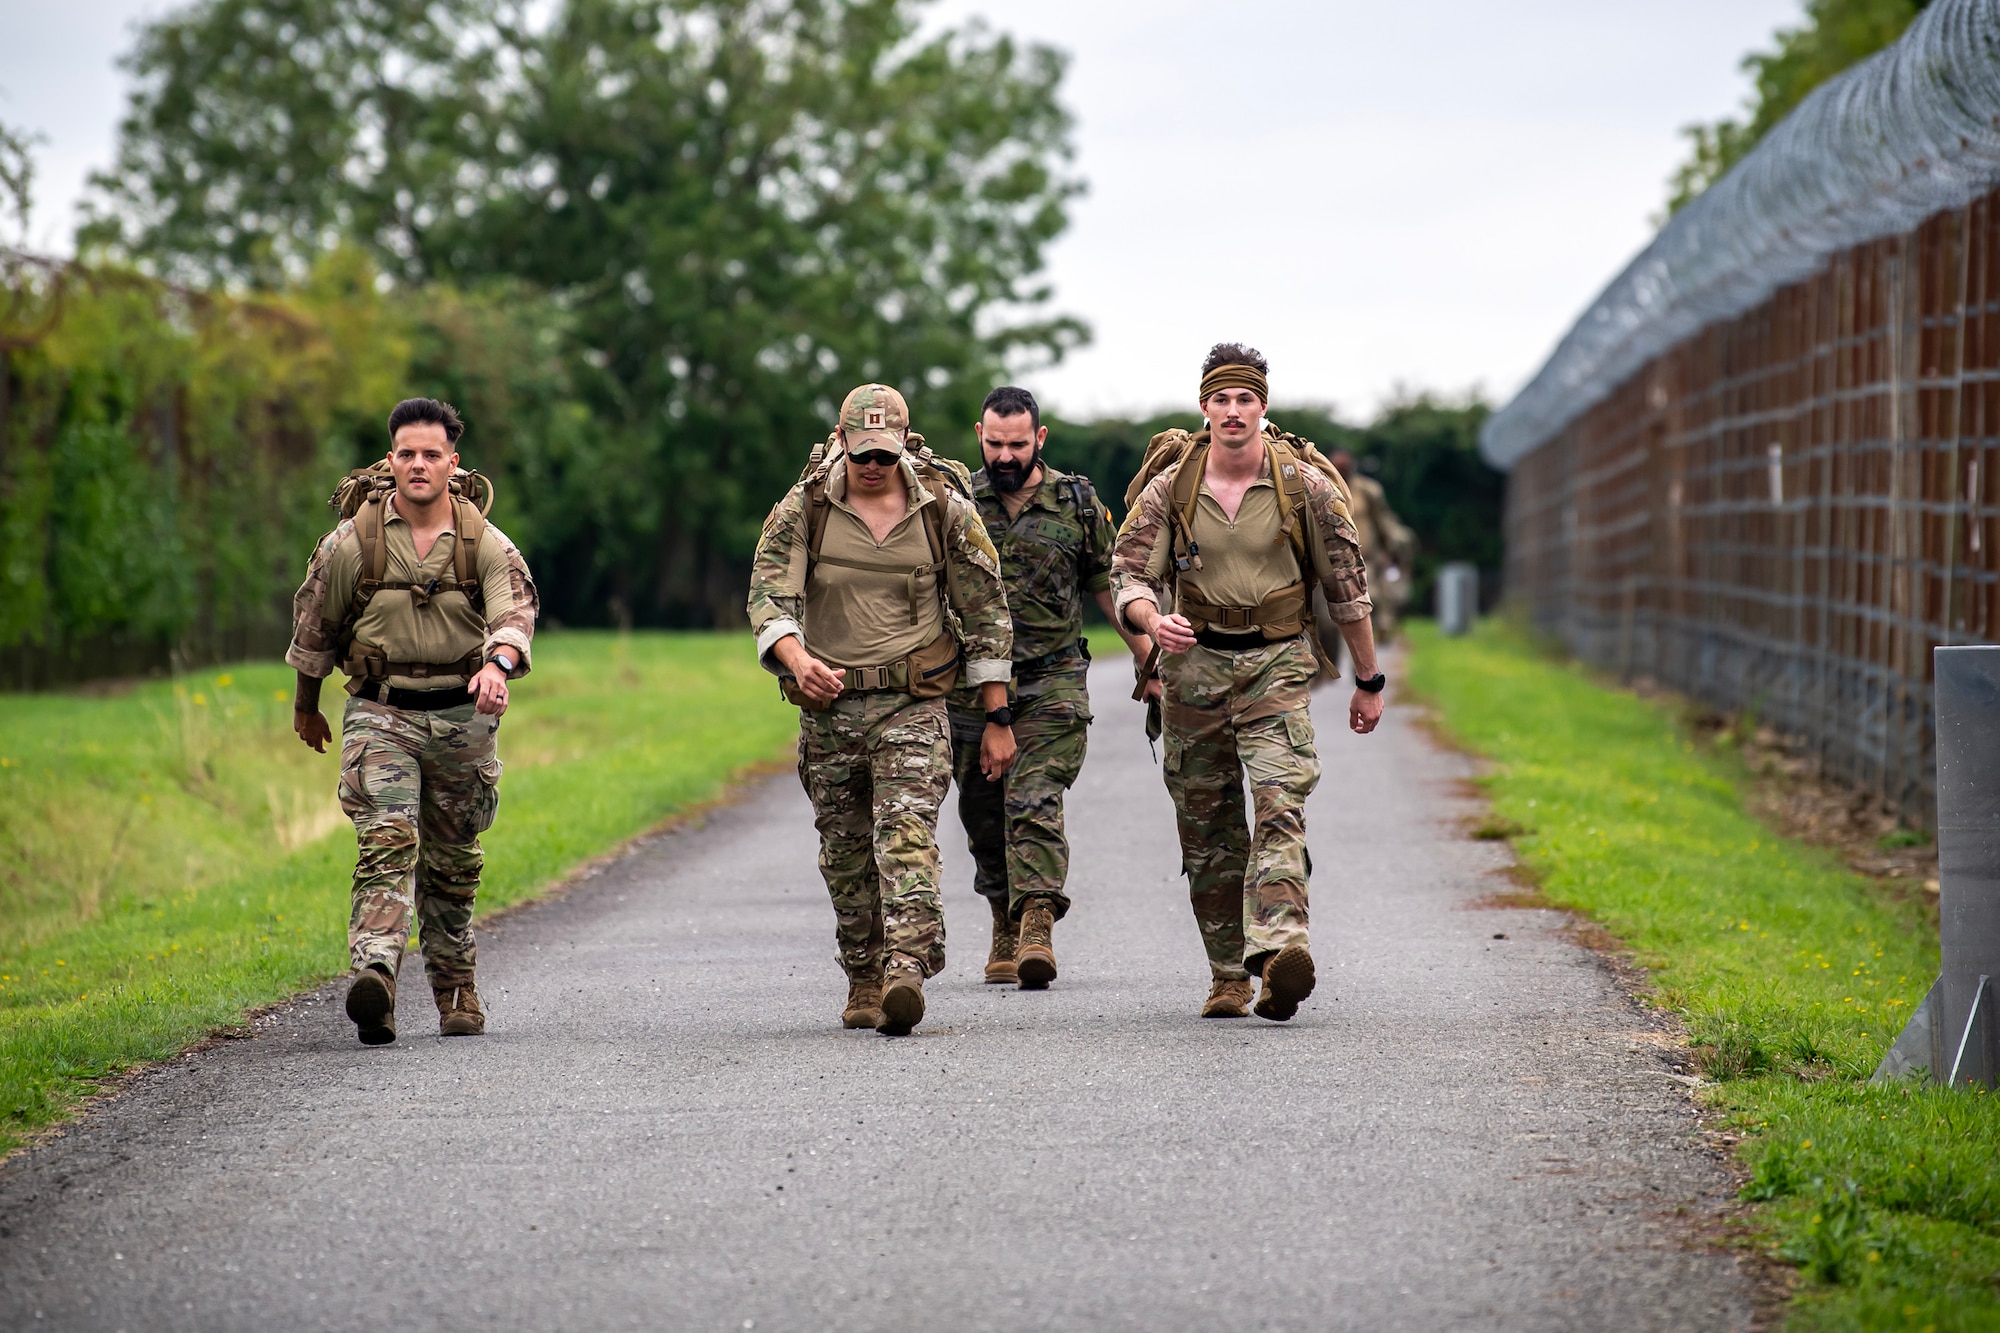 Participants complete a ruck march at RAF Molesworth, England, Aug. 18, 2023. Over 100 personnel from the 501st CSW and mission partner units participated in a 25 Kilometer Danish Contingent ruck march, which allowed them to test their physical capabilities and encouraged social bonds between joint forces. The DANCON ruck march has been completed in numerous countries throughout the world since it was established in 1972. (U.S. Air Force photo by Staff Sgt. Eugene Oliver)